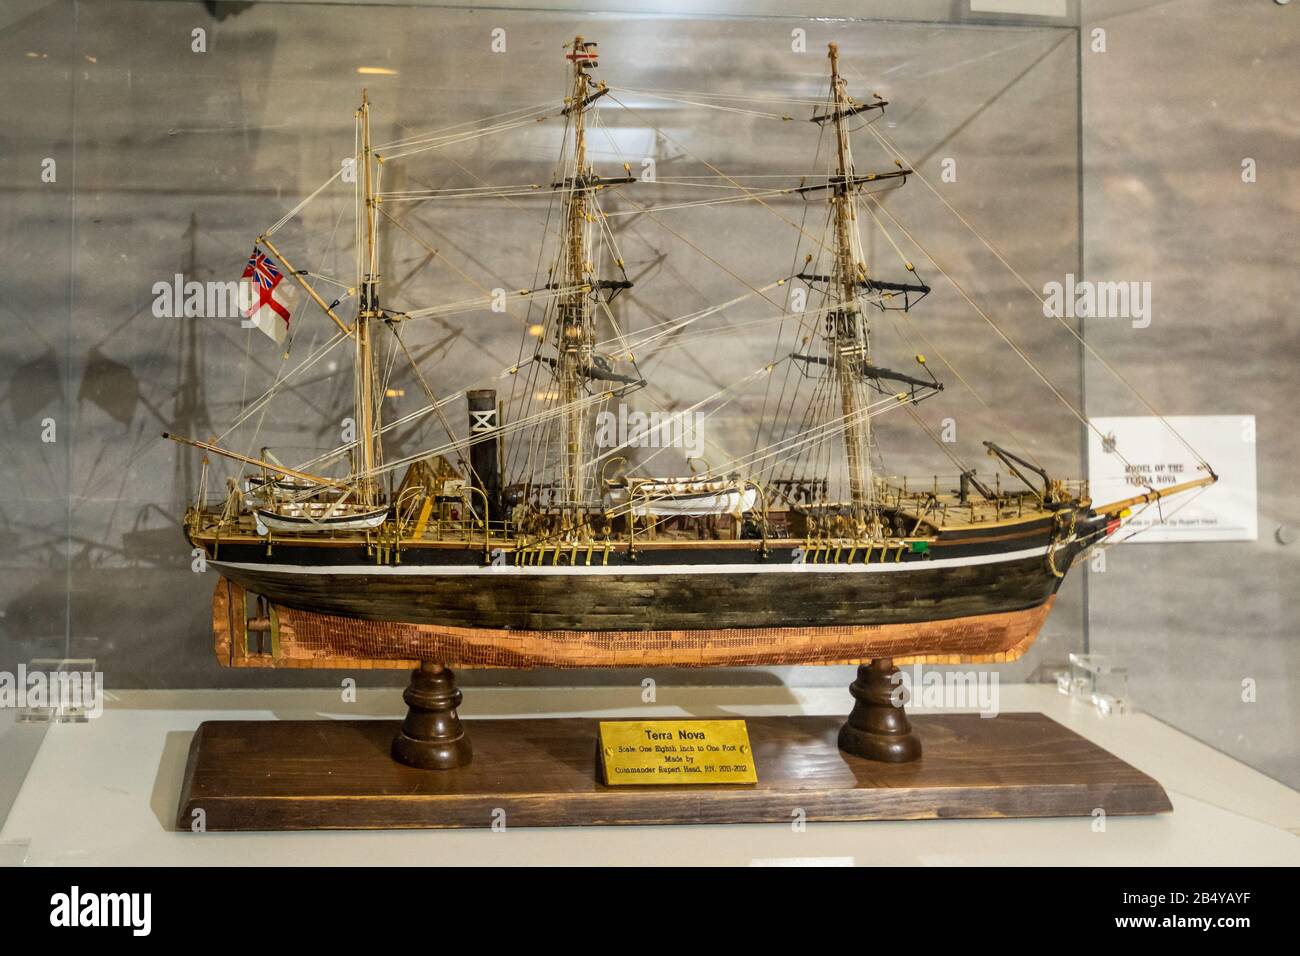 Museum exhibit in the Oates Collection, UK. A scale model of The Terra Nova ship used during the British Antarctic Expedition of 1910-1913. Stock Photo